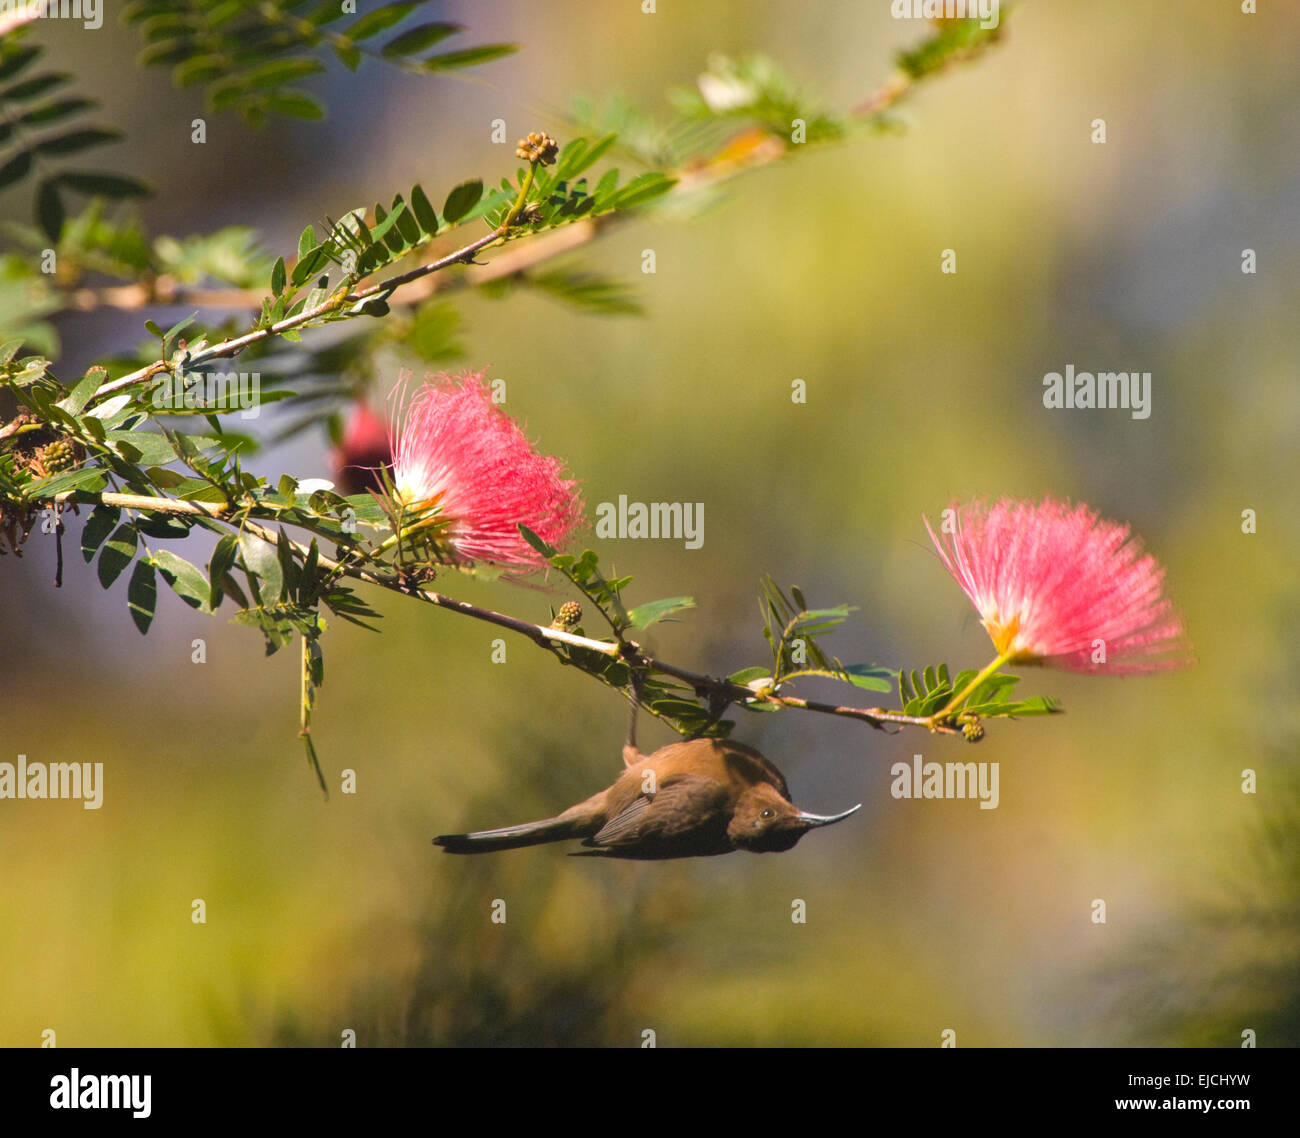 Dusky Honeyeater (Myzomela obscura) upturned on a branch with Myrtaceae flowers - Queensland, Australia Stock Photo